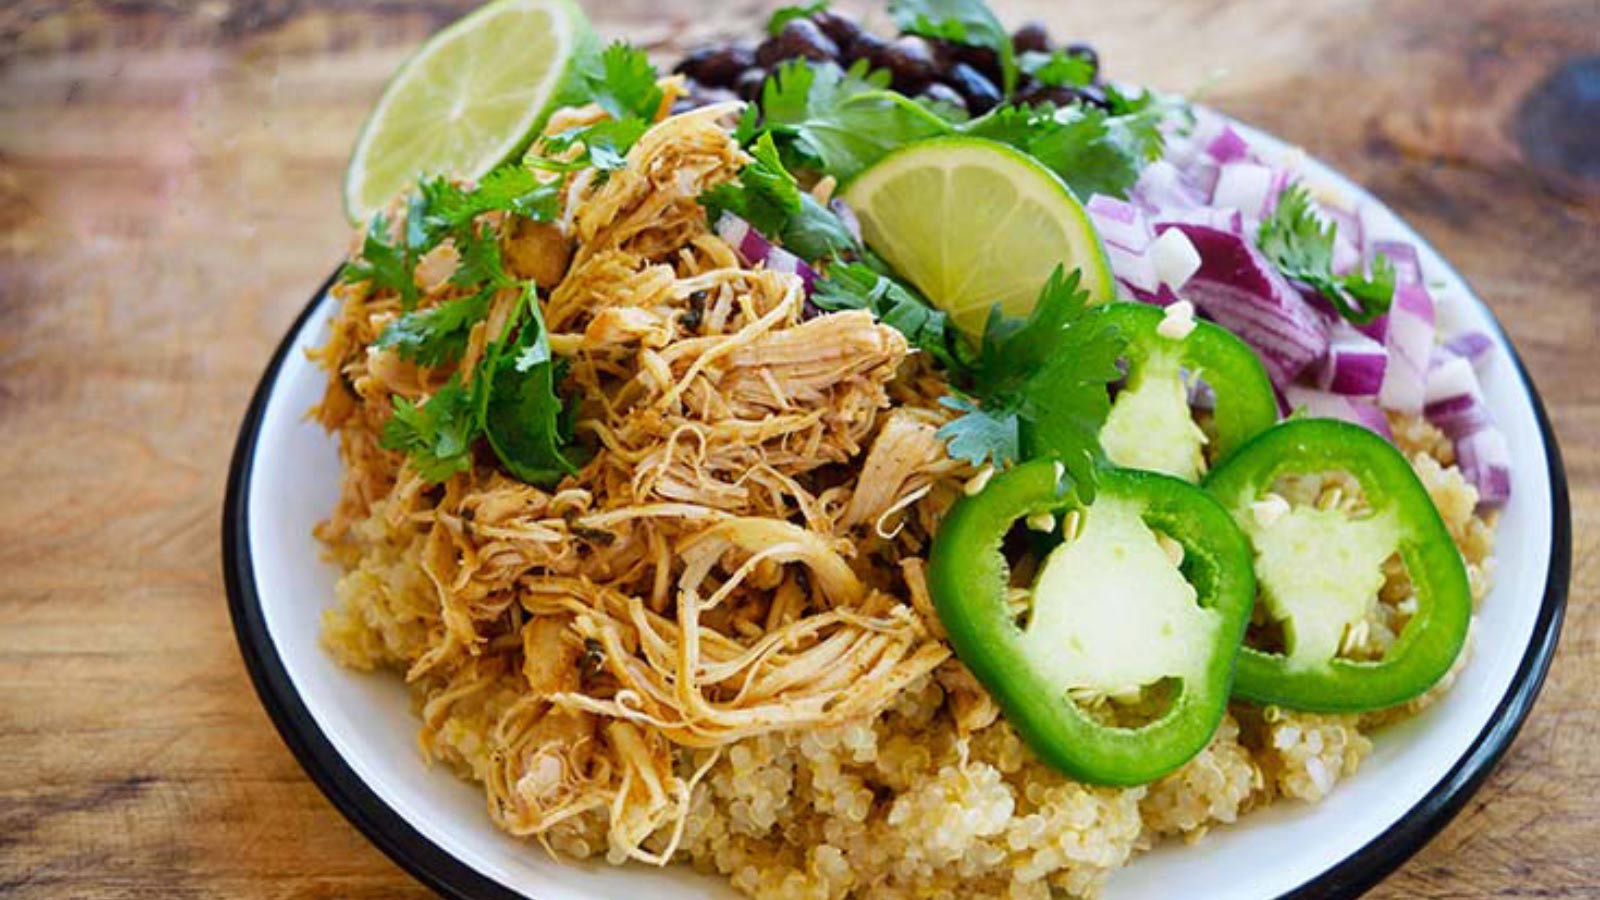 Slow Cooker Cilantro Lime Chicken served over quinoa and garnished with jalapeno pepper slices, lime slices, onions and black beans.